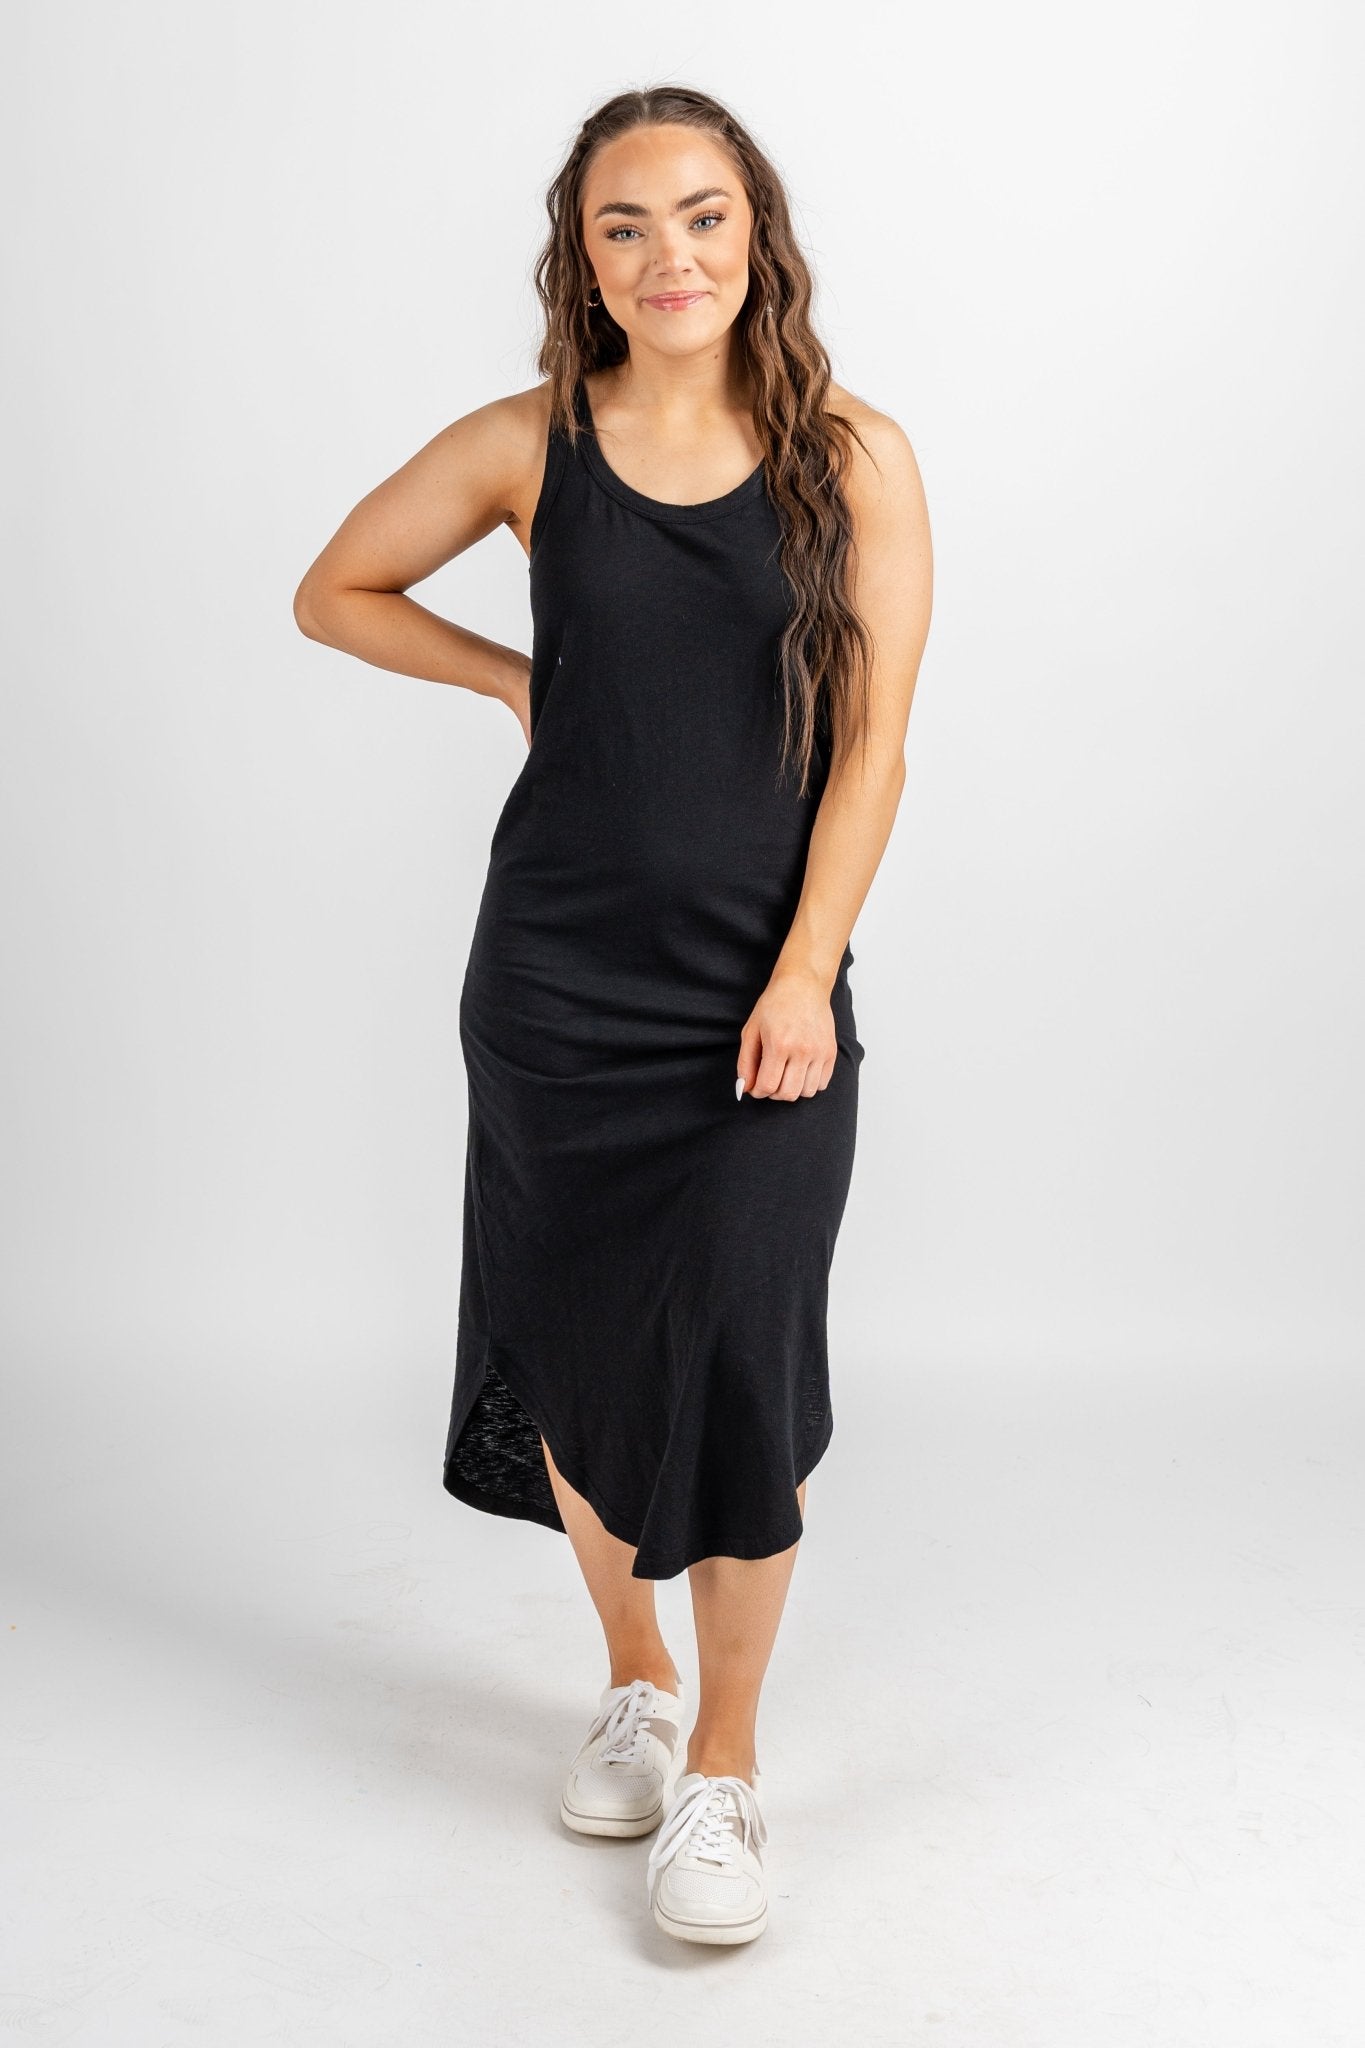 Z Supply Easy going dress black - Z Supply Dress - Z Supply Tops, Dresses, Tanks, Tees, Cardigans, Joggers and Loungewear at Lush Fashion Lounge